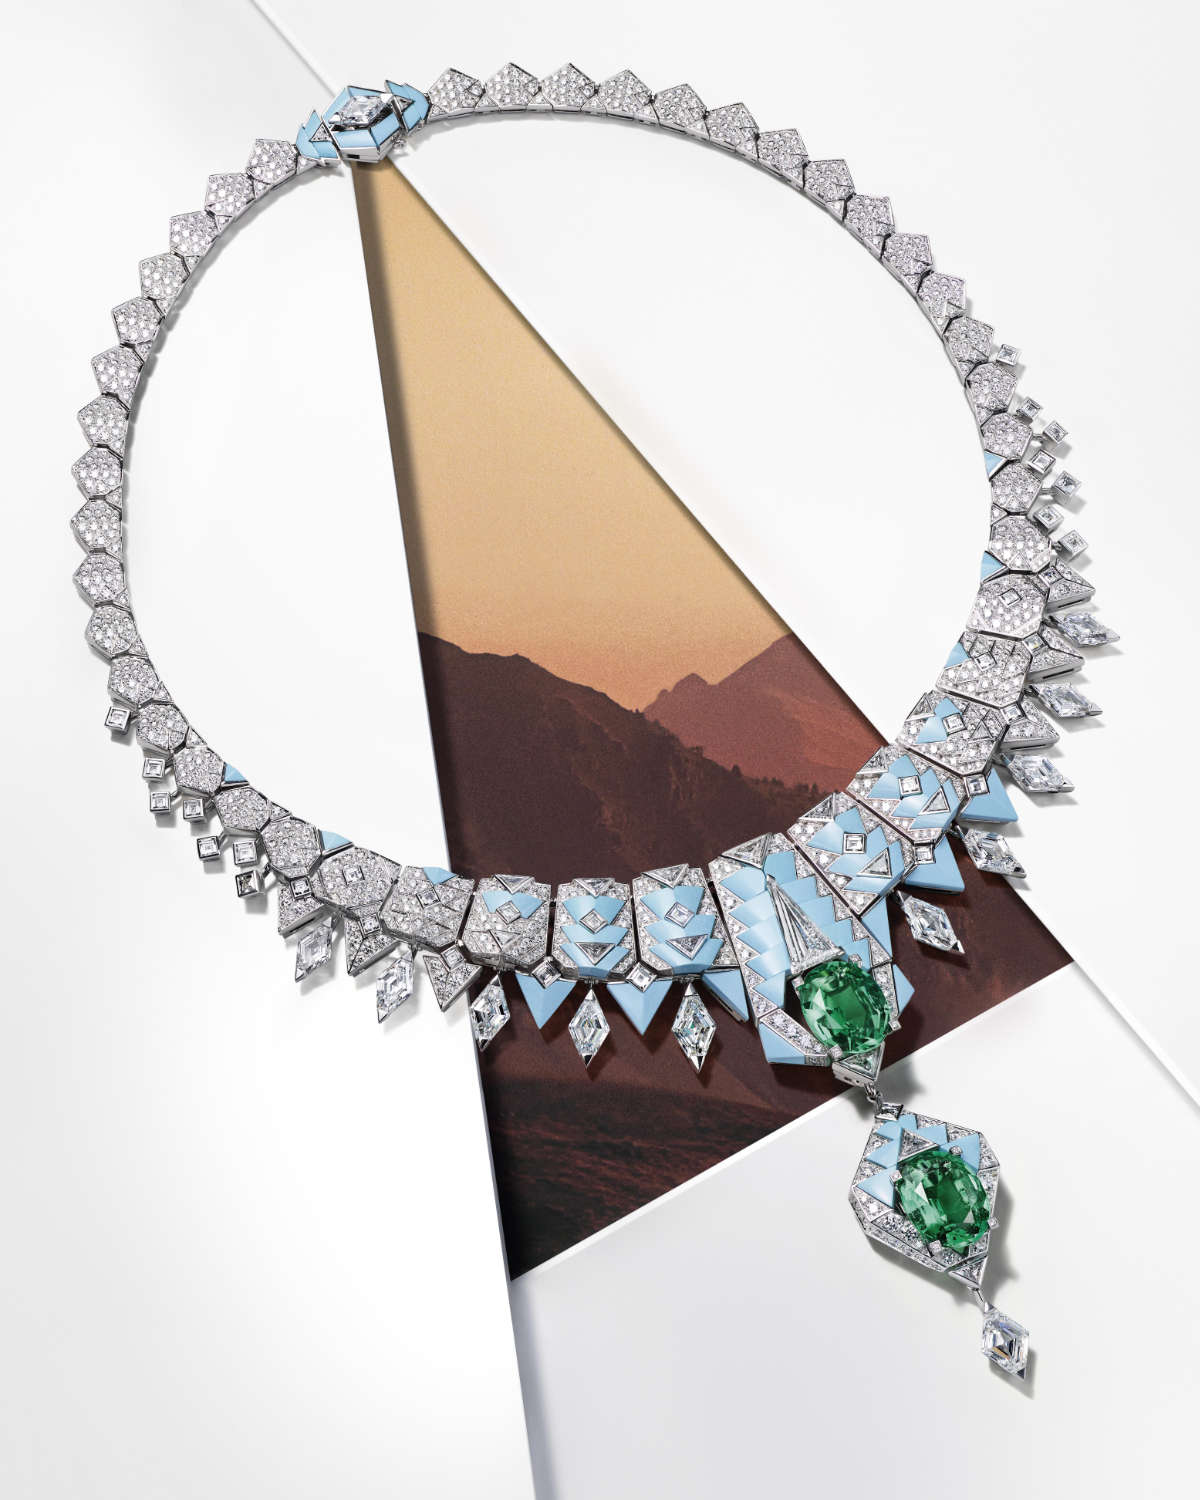 Cartier Presents Its New High Jewellery Collection: Le Voyage Recommencé